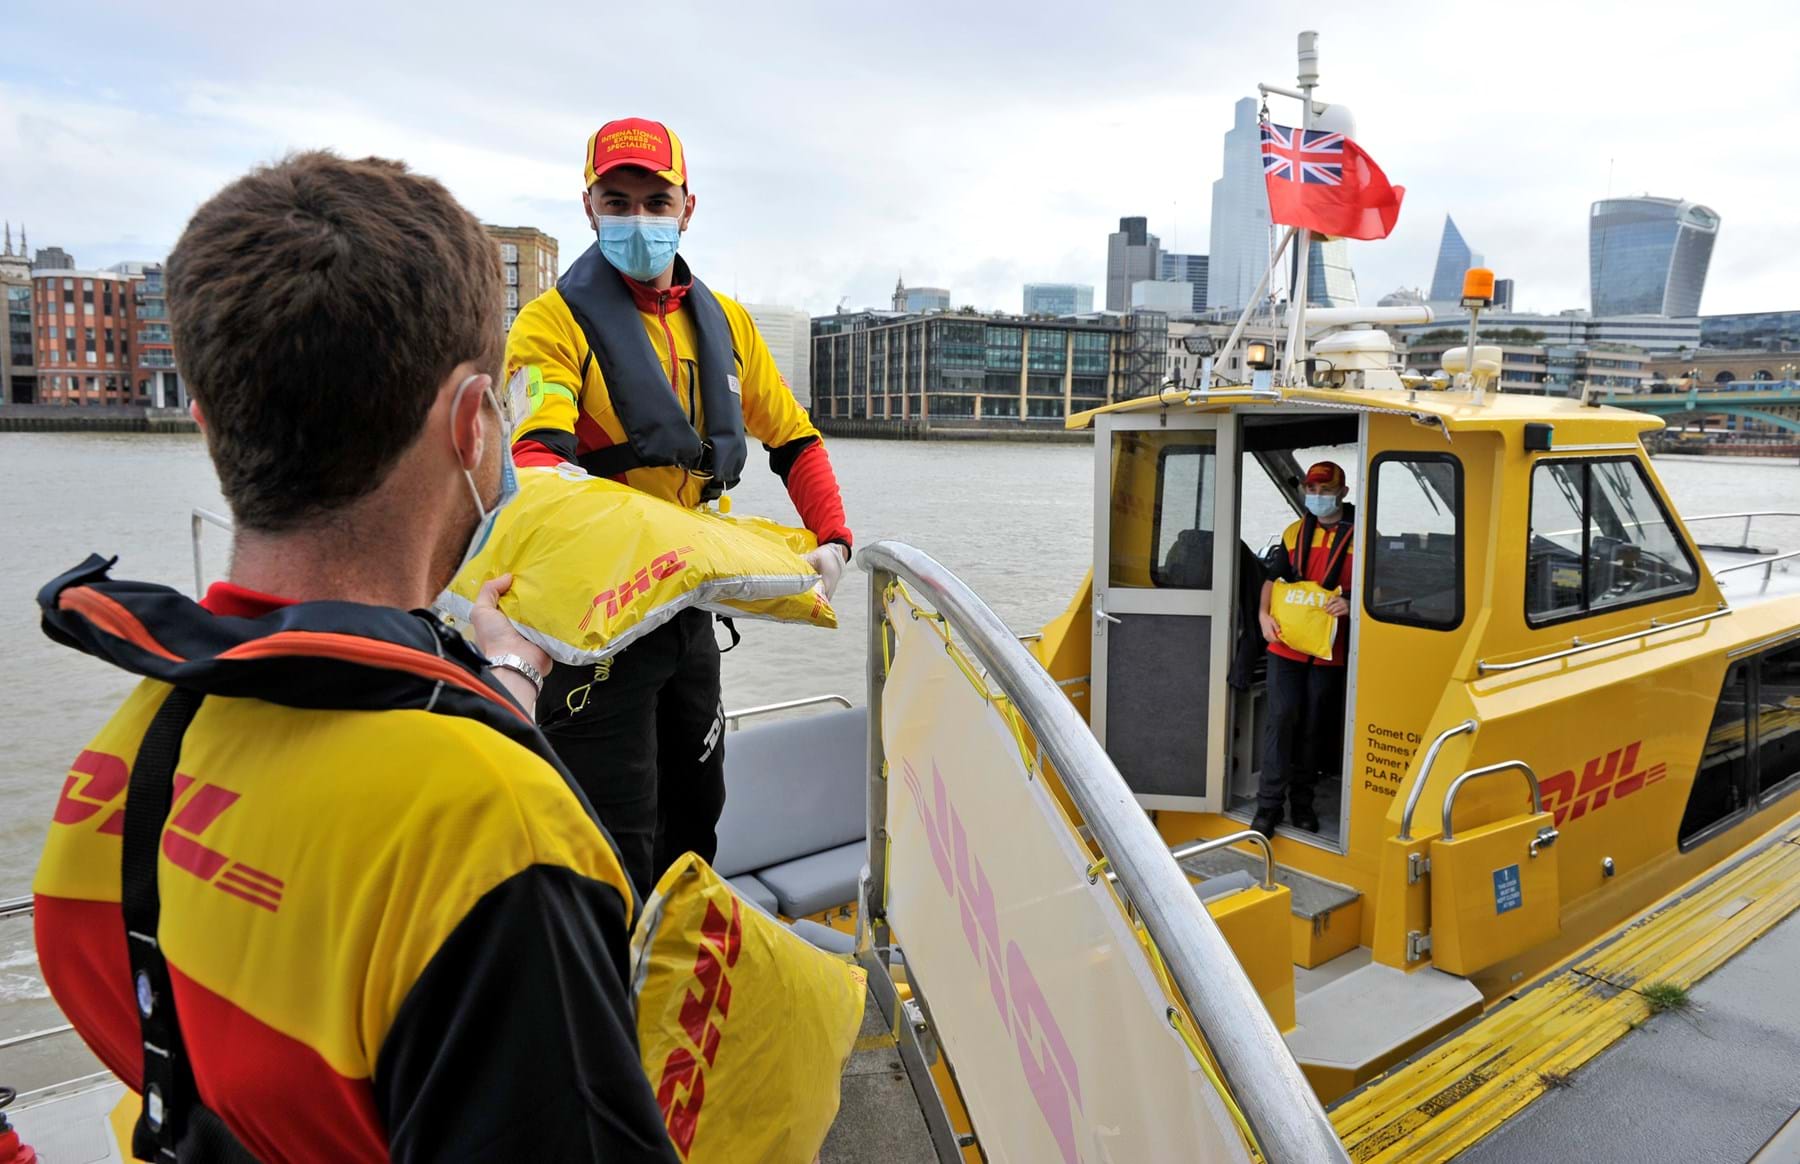 Dhl Now Delivers On The River Uber Boat By Thames Clippers